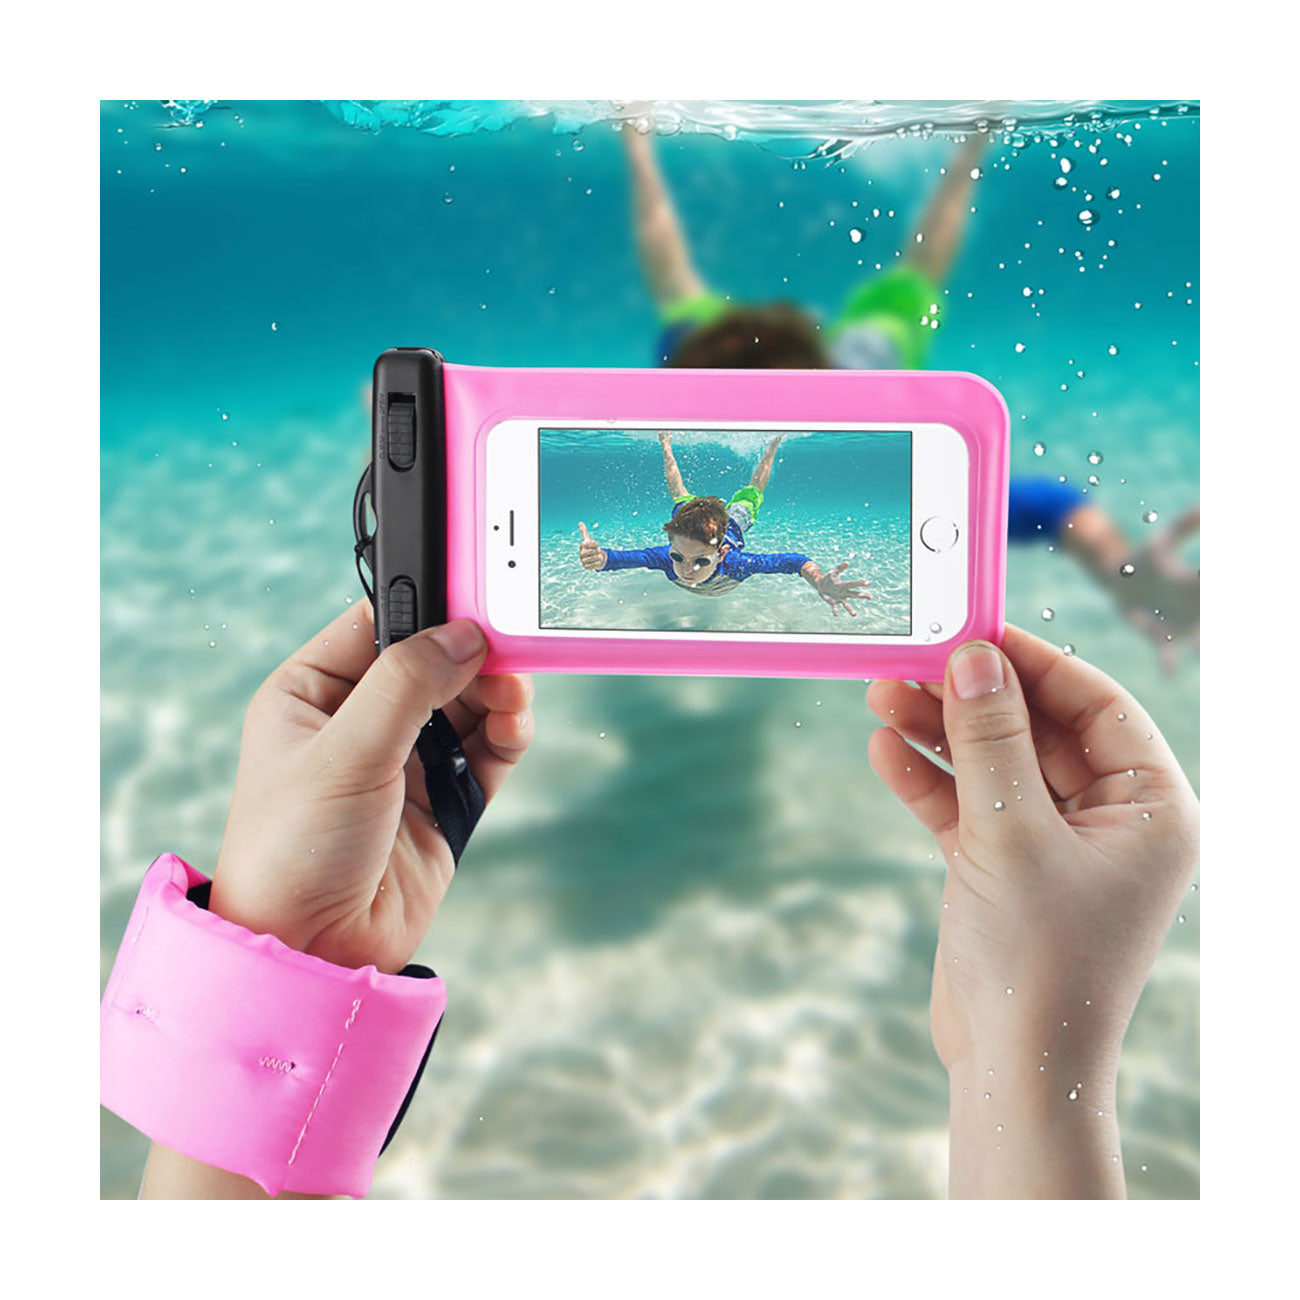 Case Waterproof With Touch Screen Floating Adjustable Wrist Strap 4.7X2.4X0.4 Inches Devices Hot Pink Color